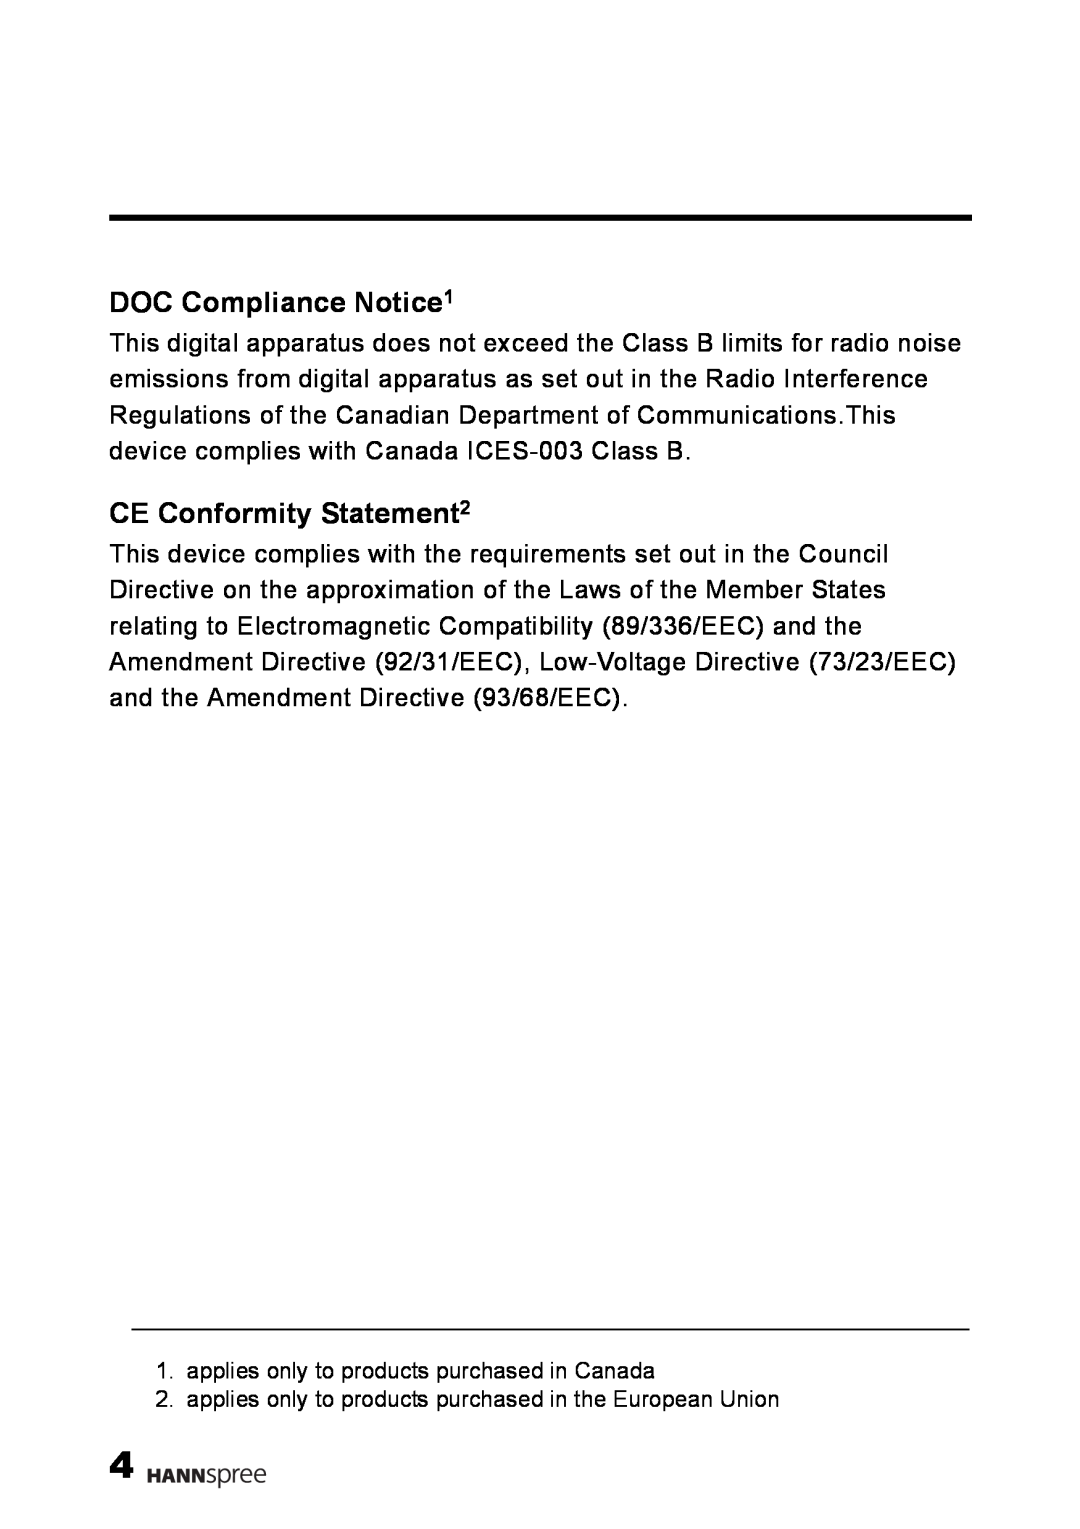 HANNspree LT02-12U1-000 DOC Compliance Notice1, CE Conformity Statement2, applies only to products purchased in Canada 